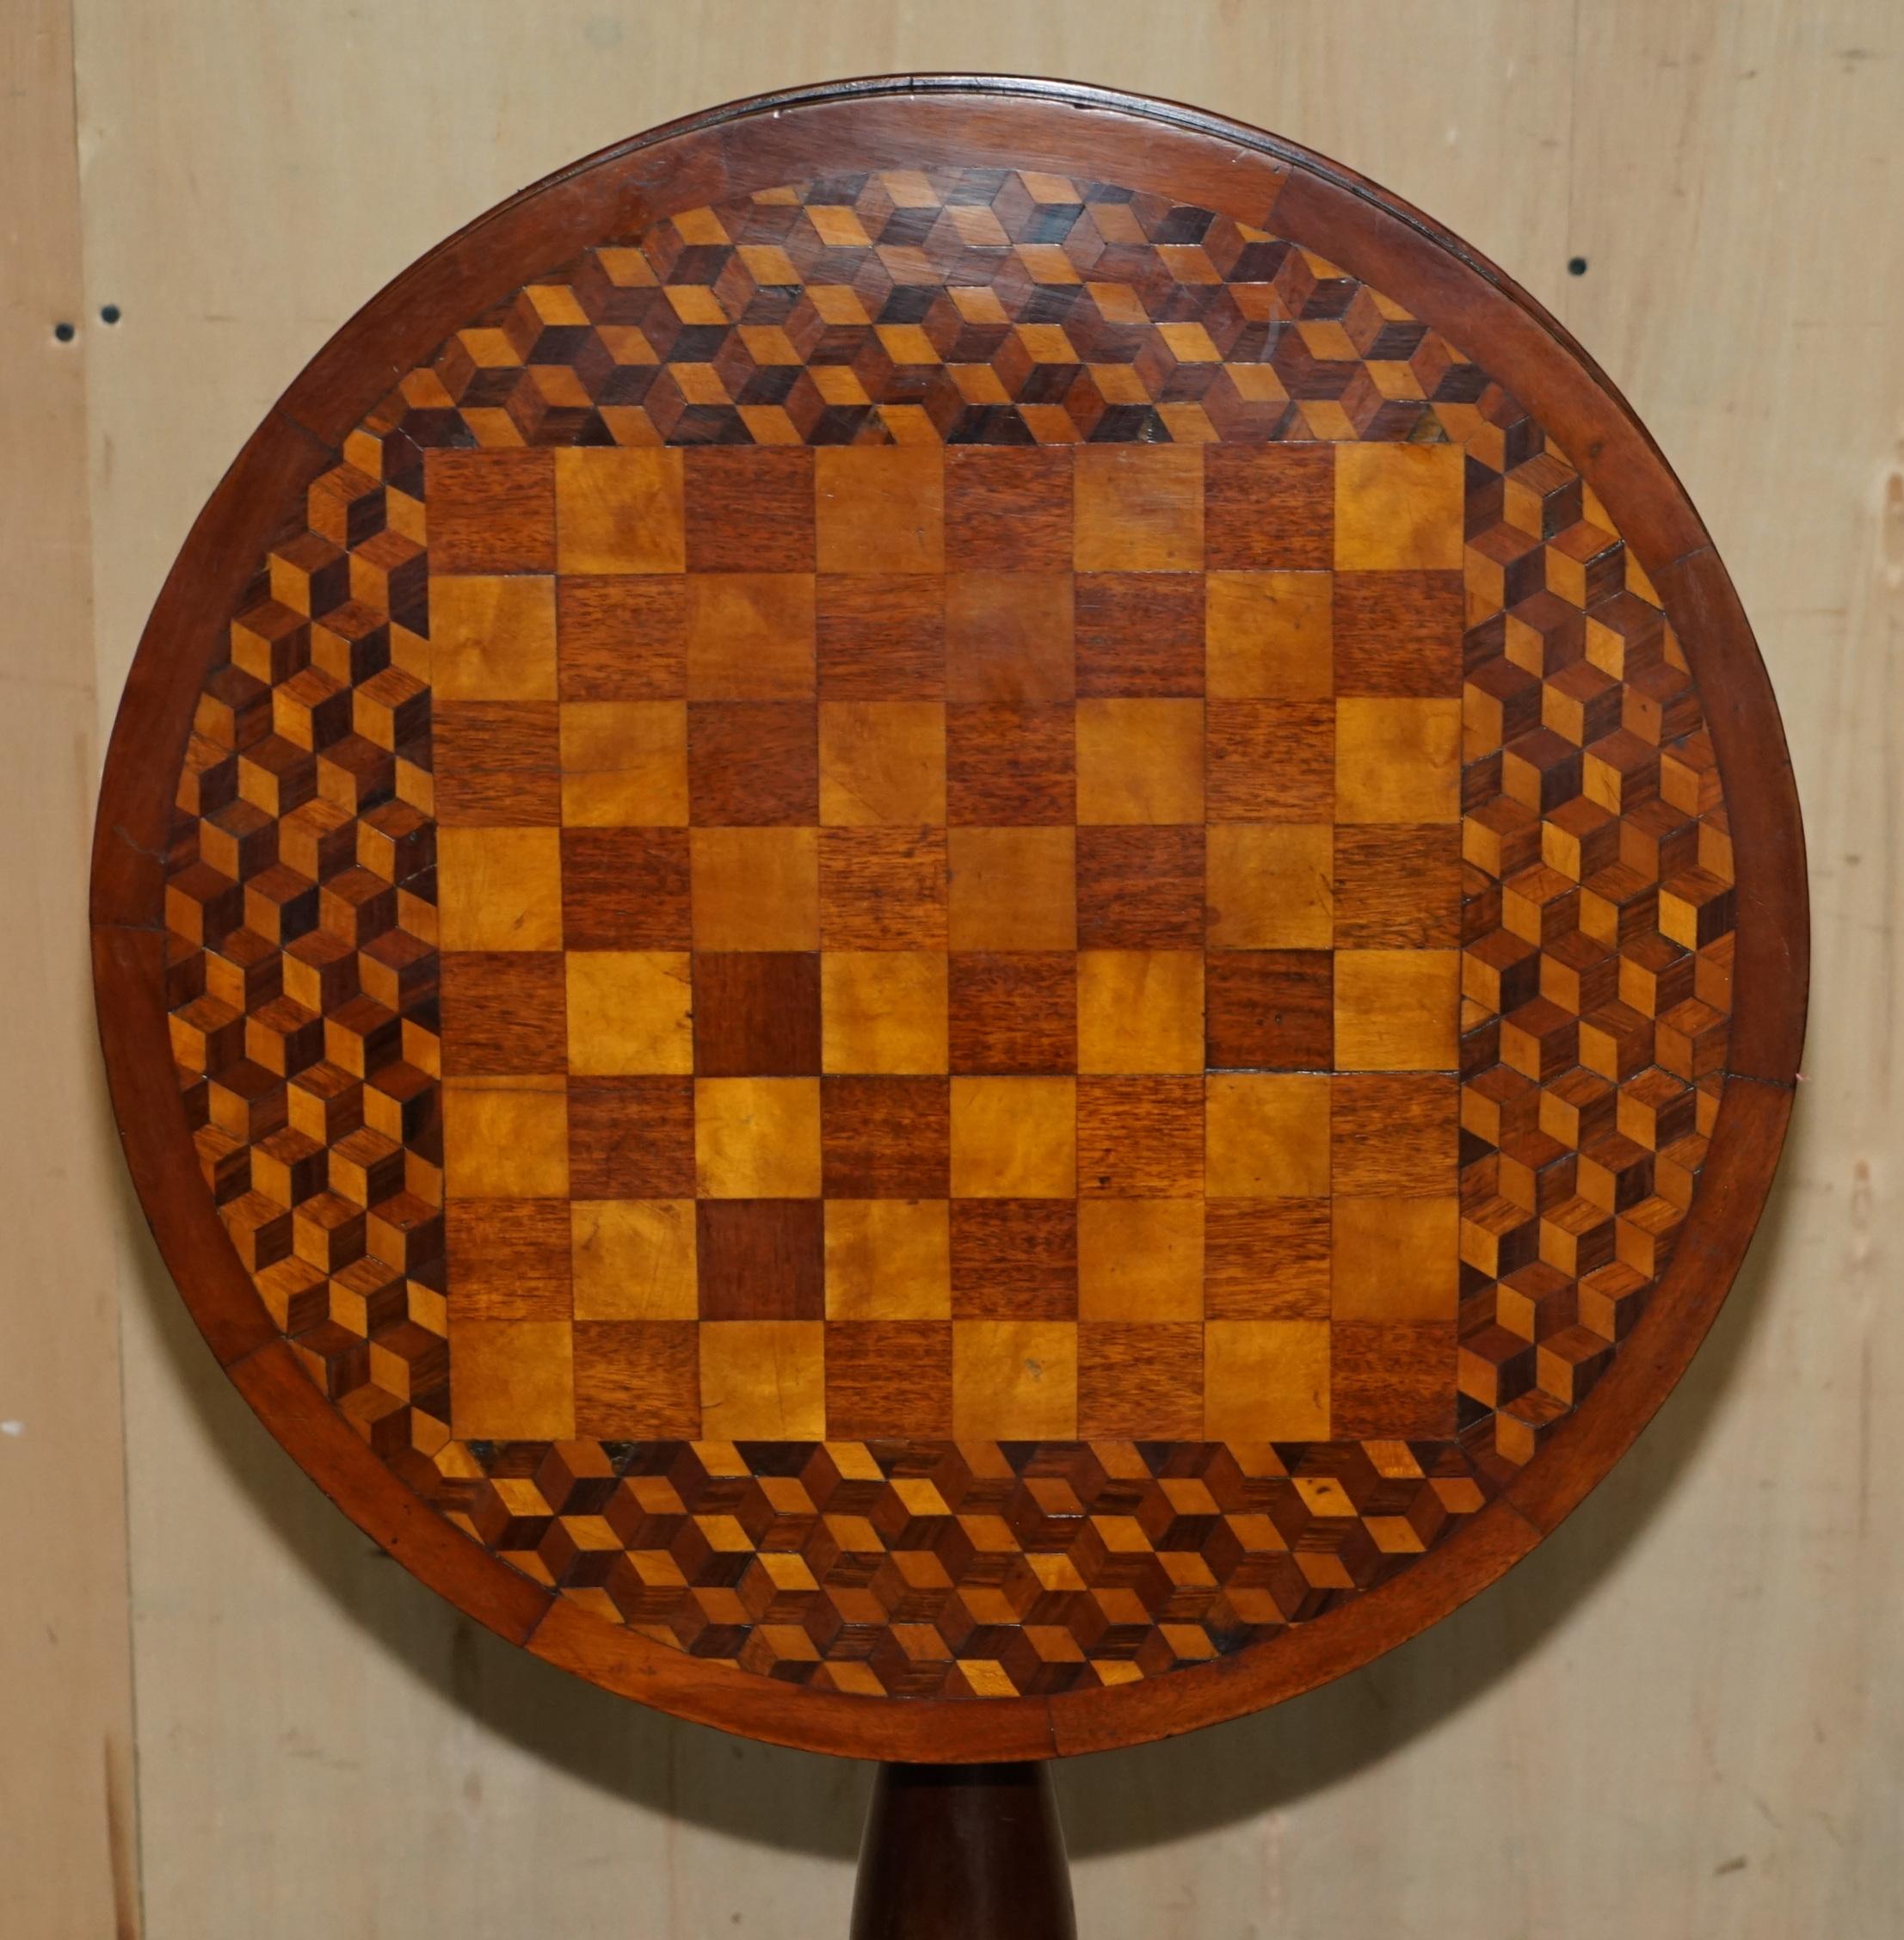 ANTIQUE ViCTORIAN WALNUT & HARDWOOD PARQUETRY INLAID TiLT TOP CHESS GAMES TABLE For Sale 7